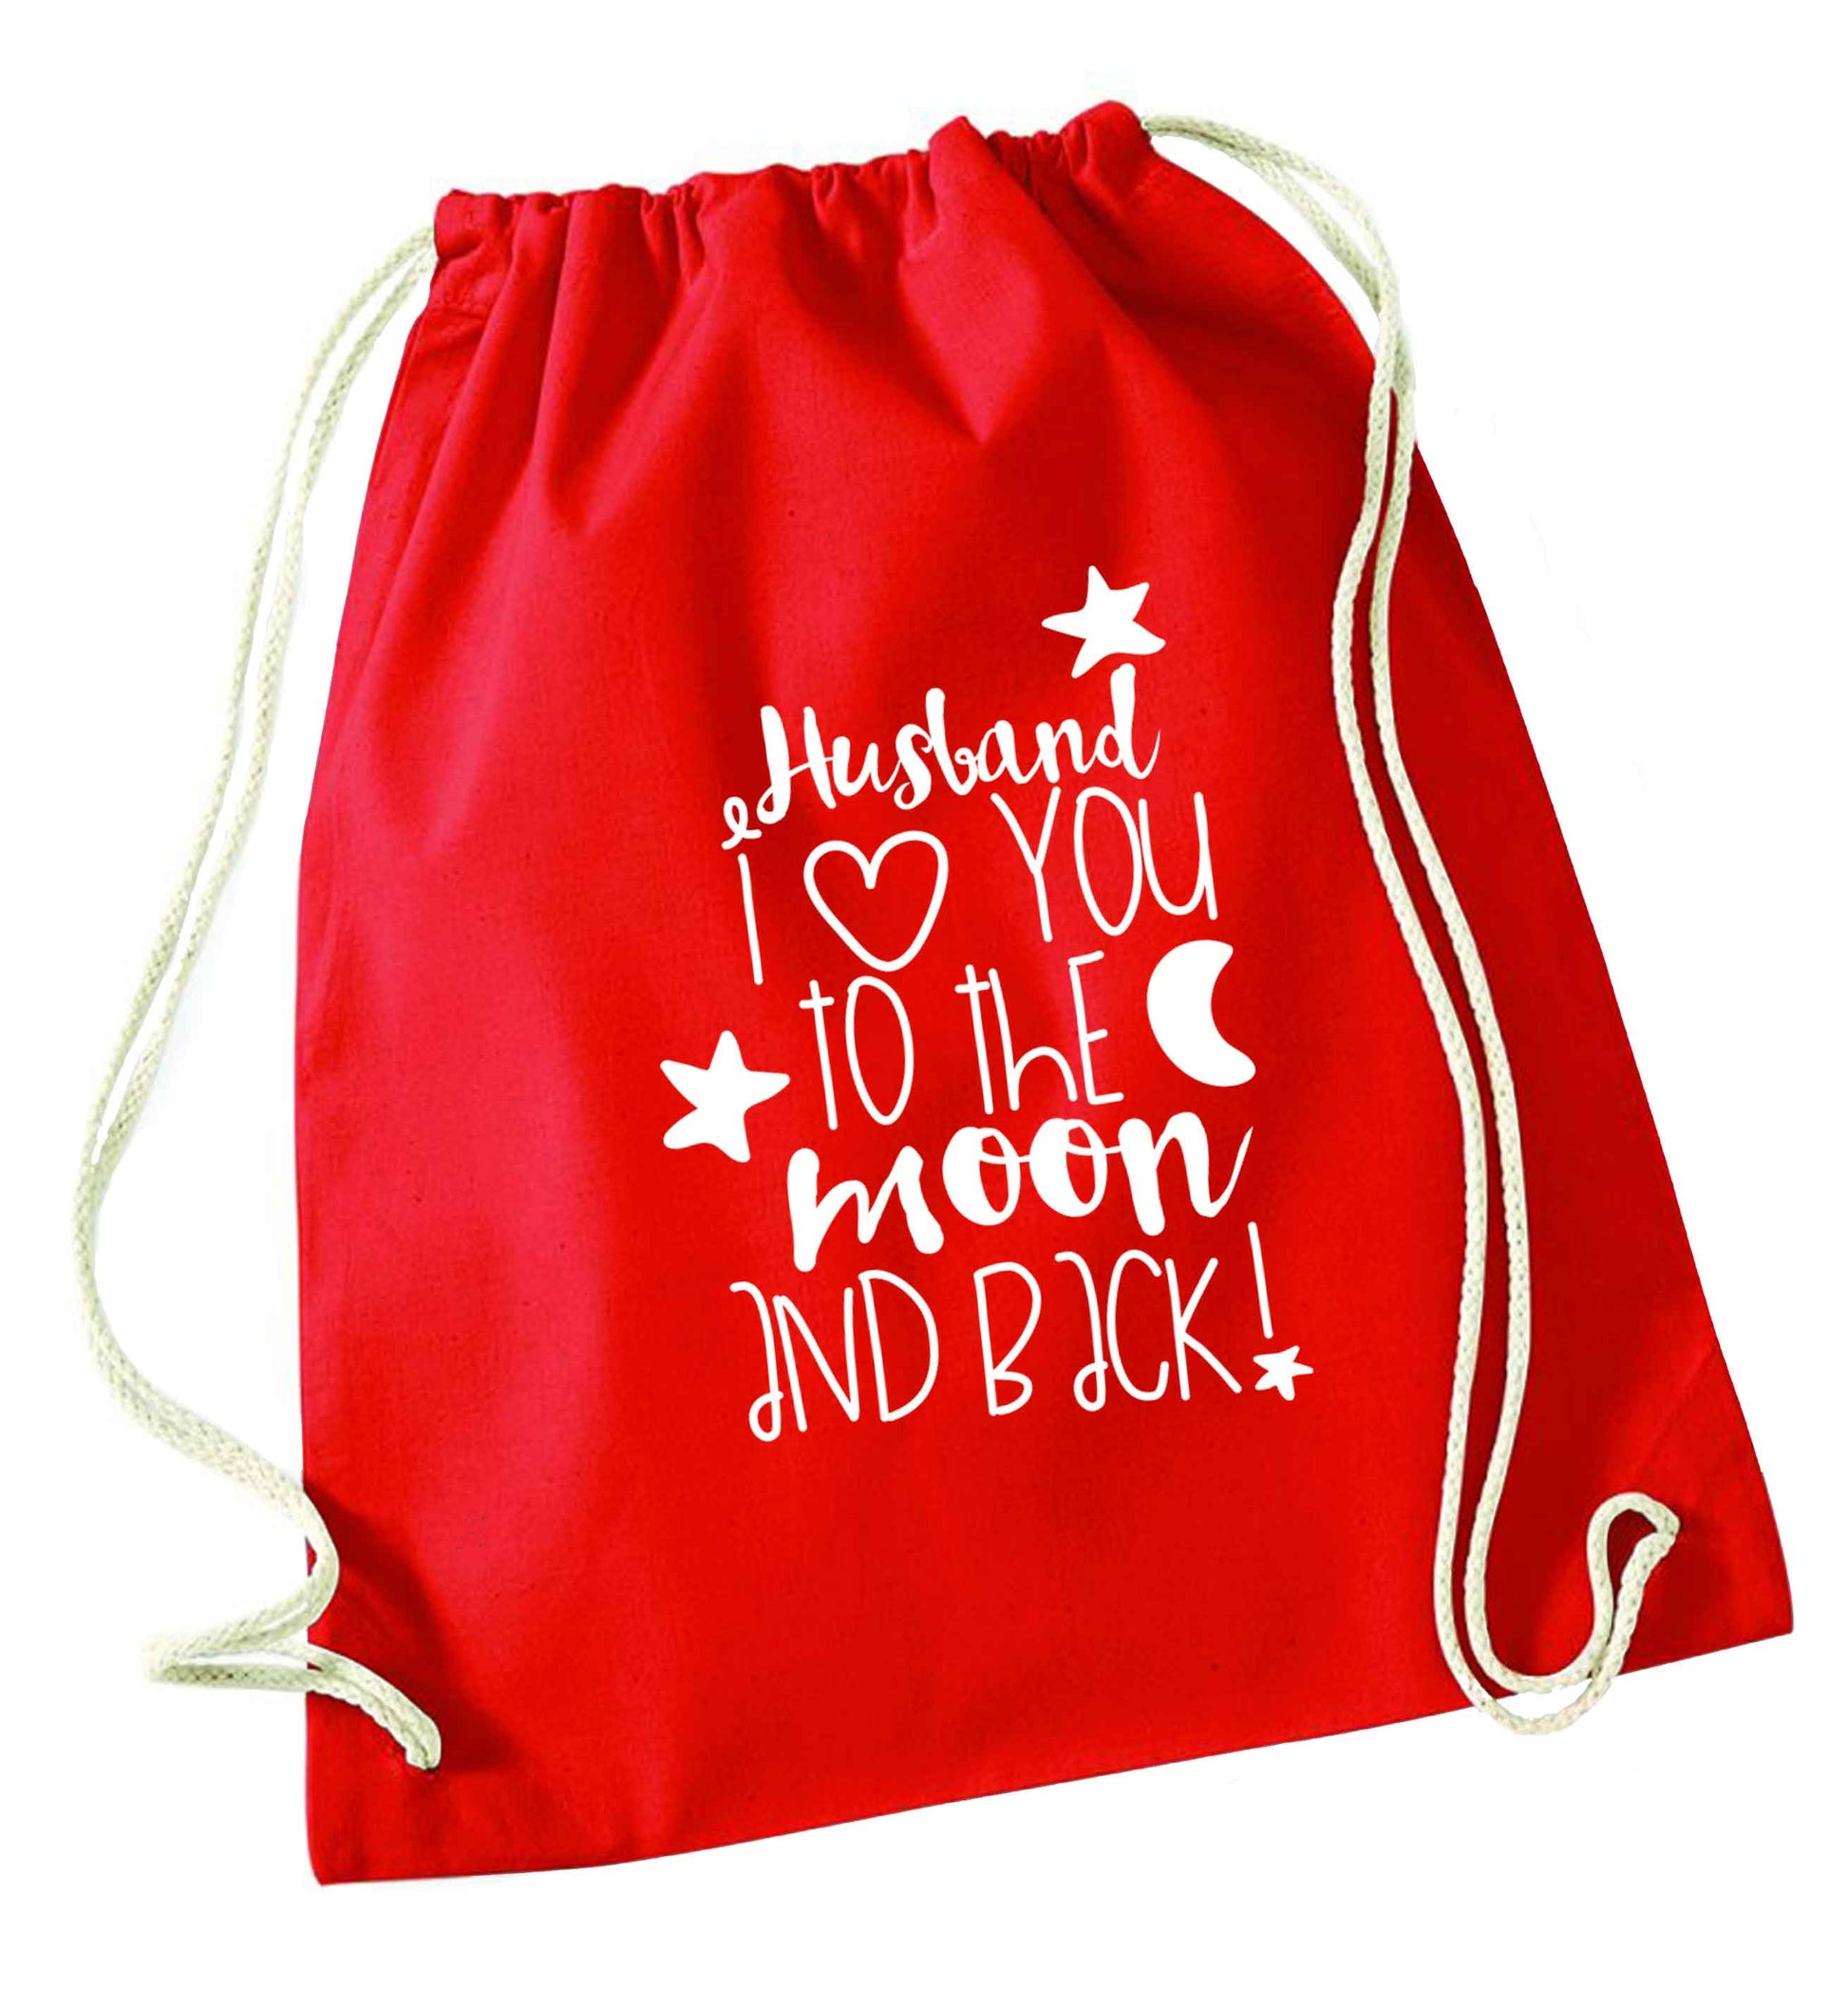 Husband I love you to the moon and back red drawstring bag 